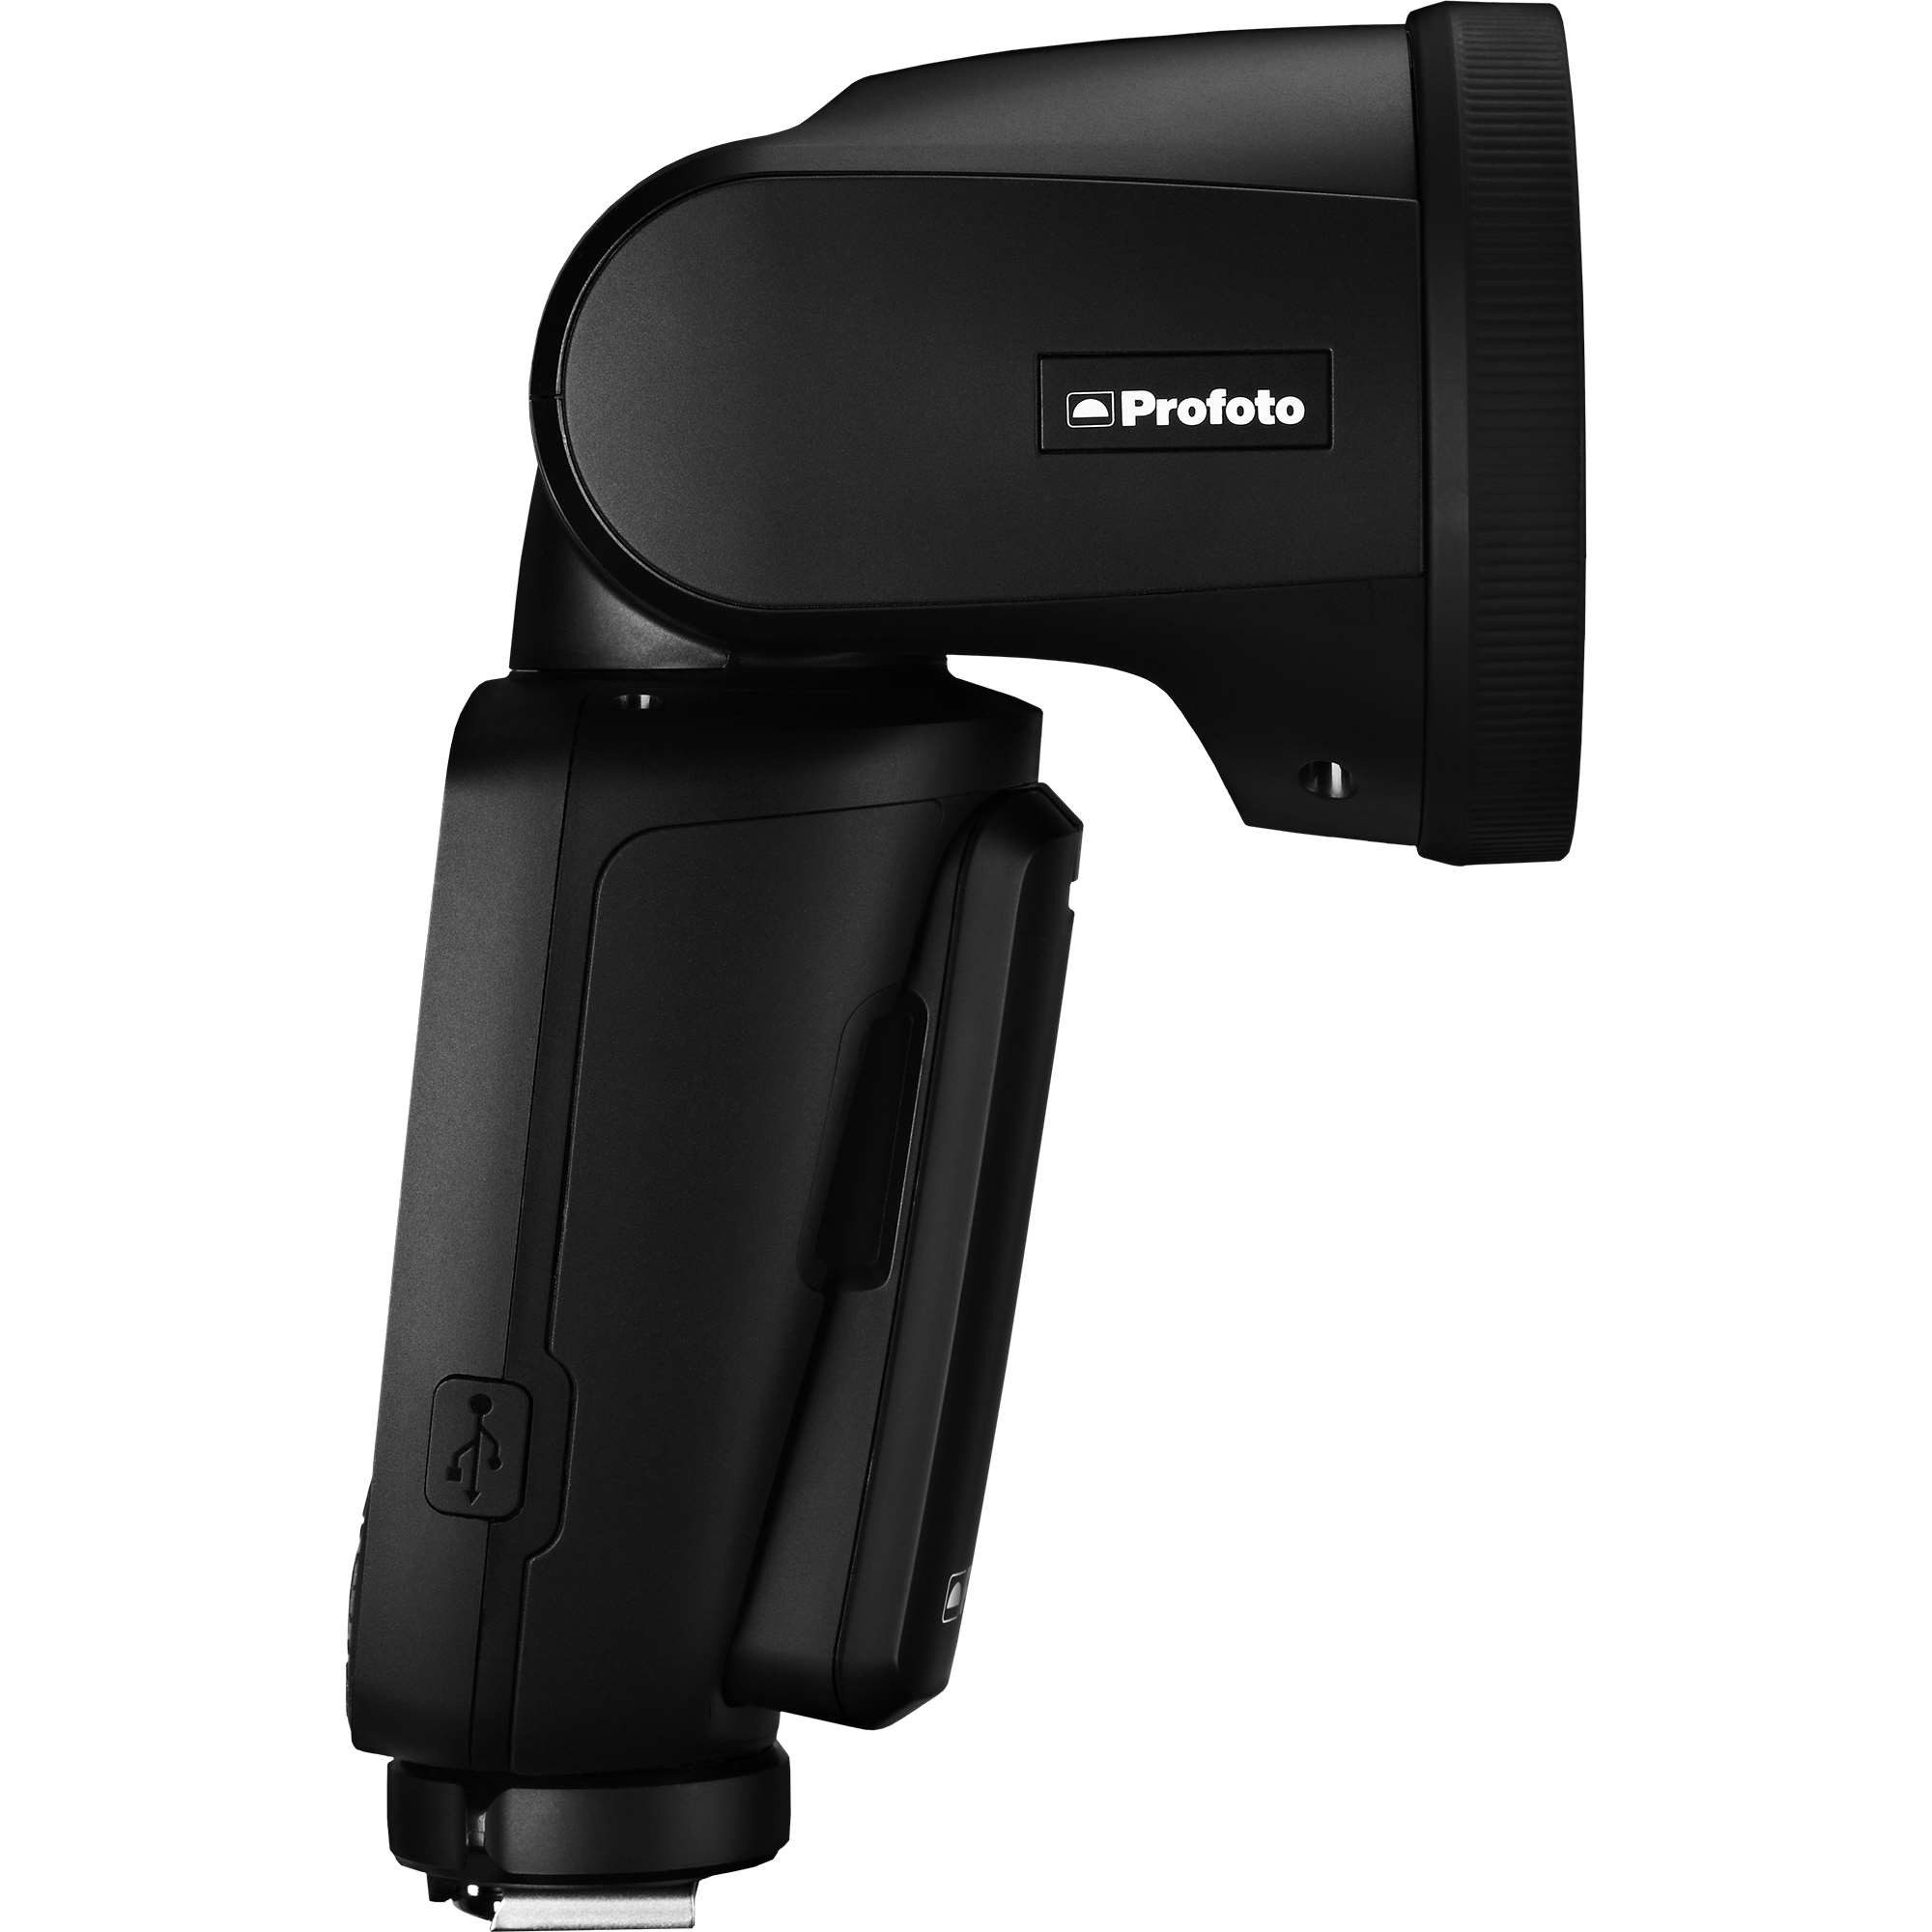 Profoto A1X AirTTL-C for Canon